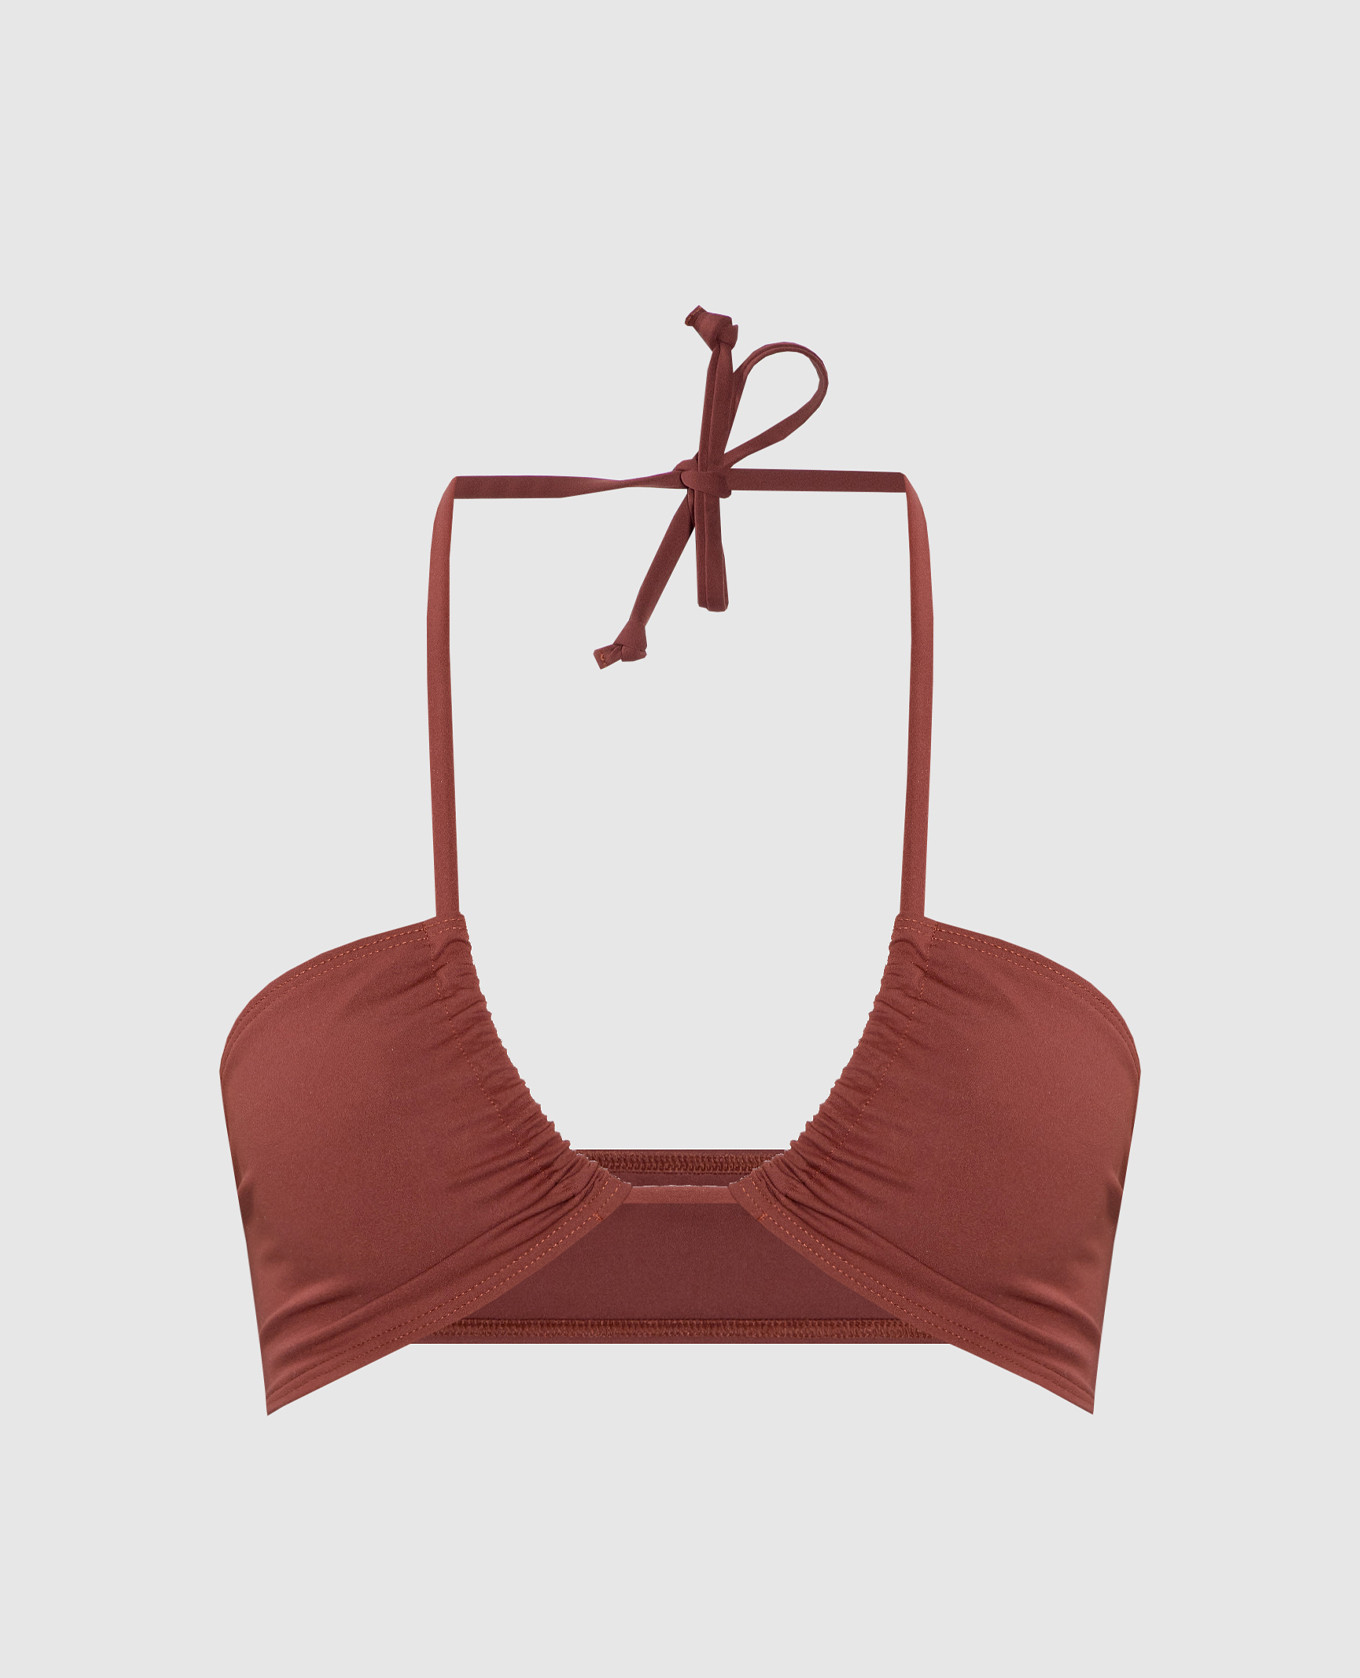 Brown bodice from a swimsuit